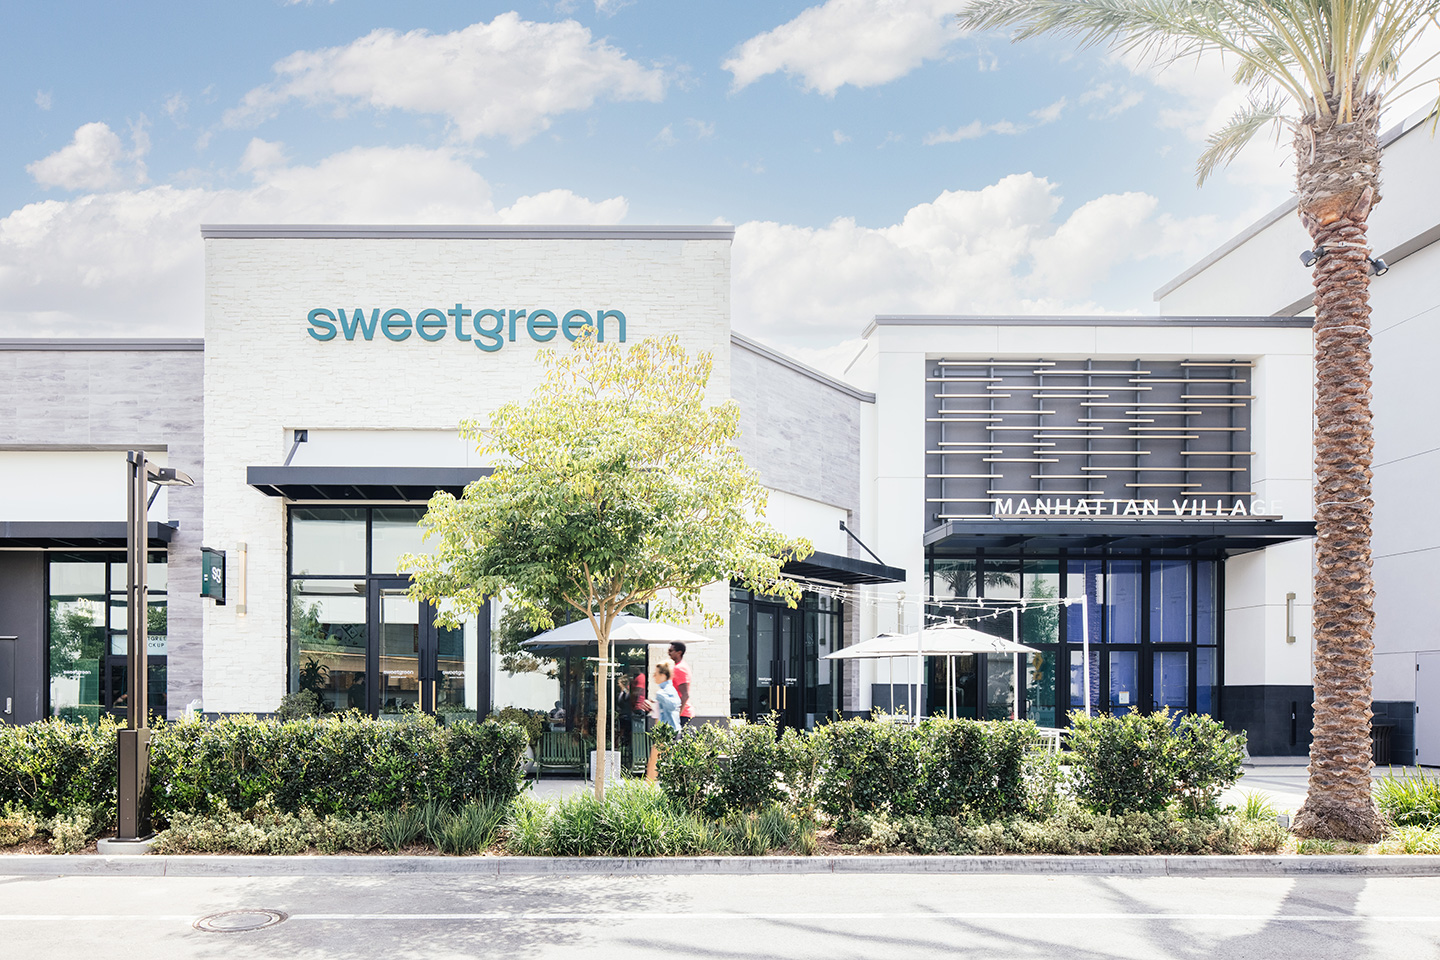 A new sweetgreen storefront in Manhattan Beach, California, proudly displays the brand and optimizes transparency, creating a great interior and exterior customer experience.